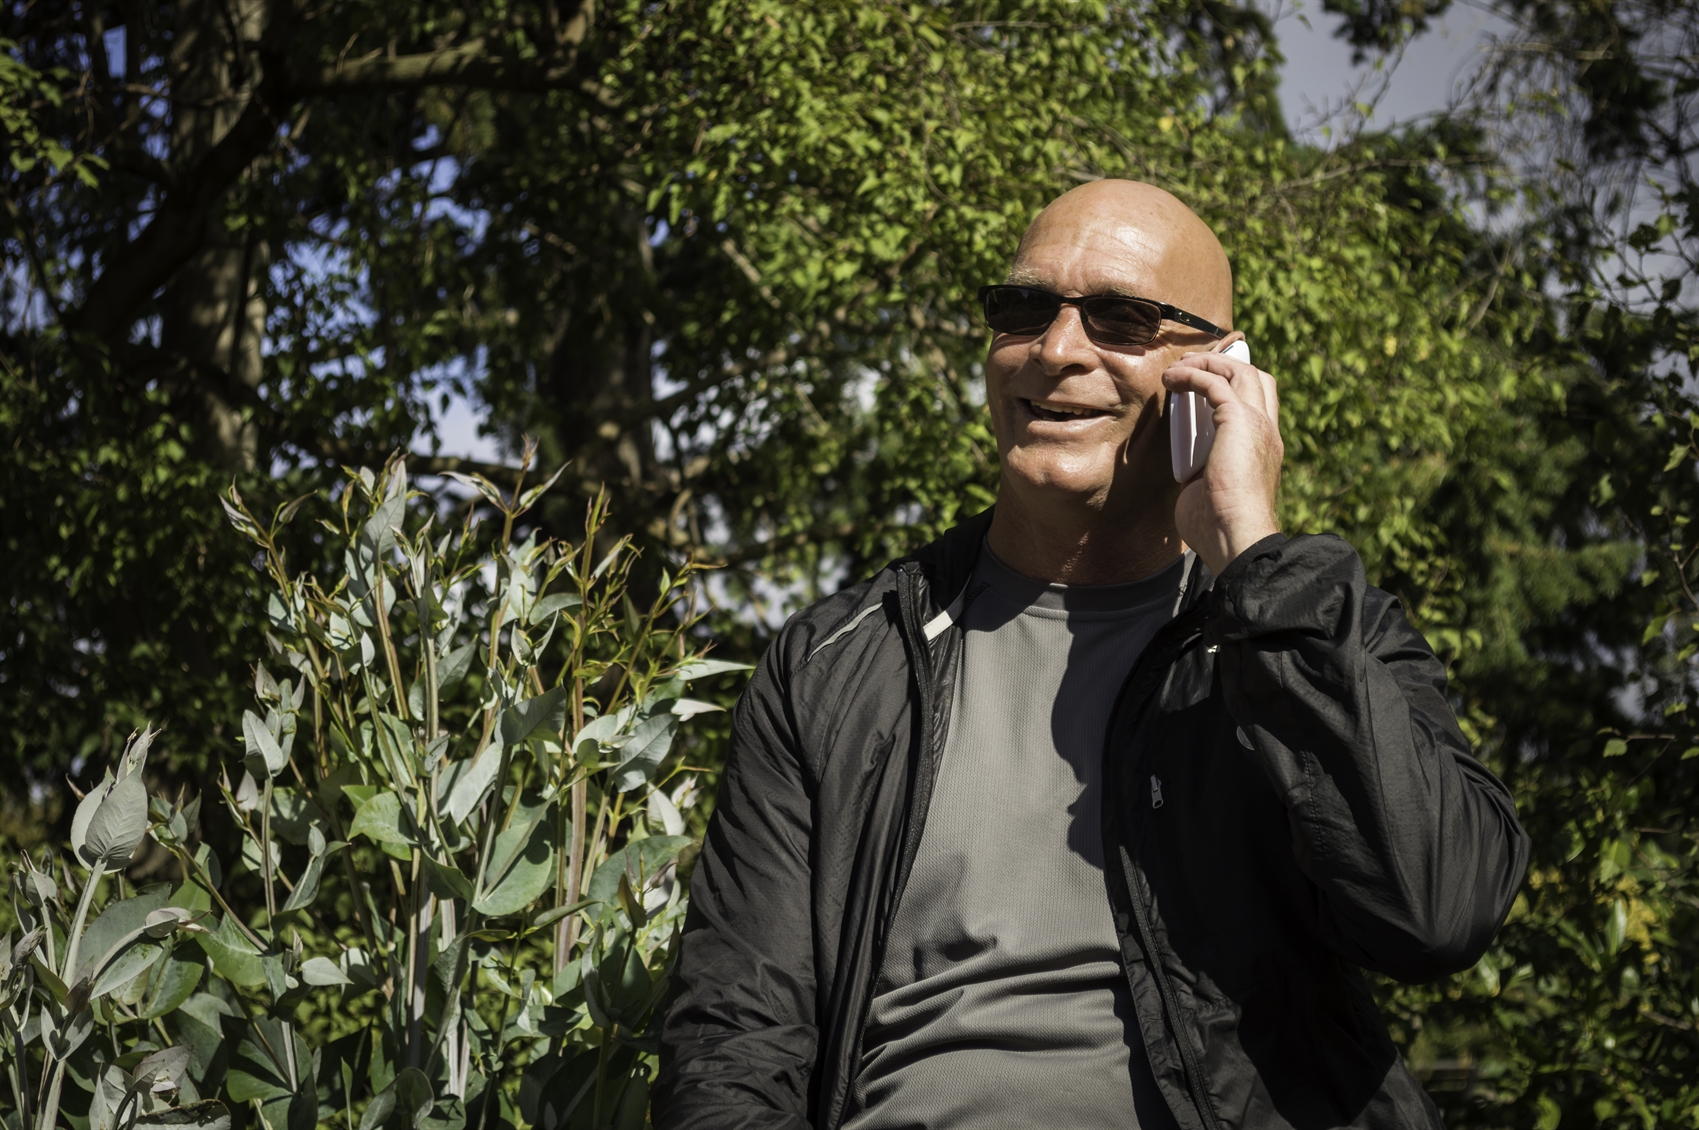 A middle-age man is talking on his mobile phone. He is outside amongst trees and is wearing dark glass, a black jacket and a grey t-shirt.